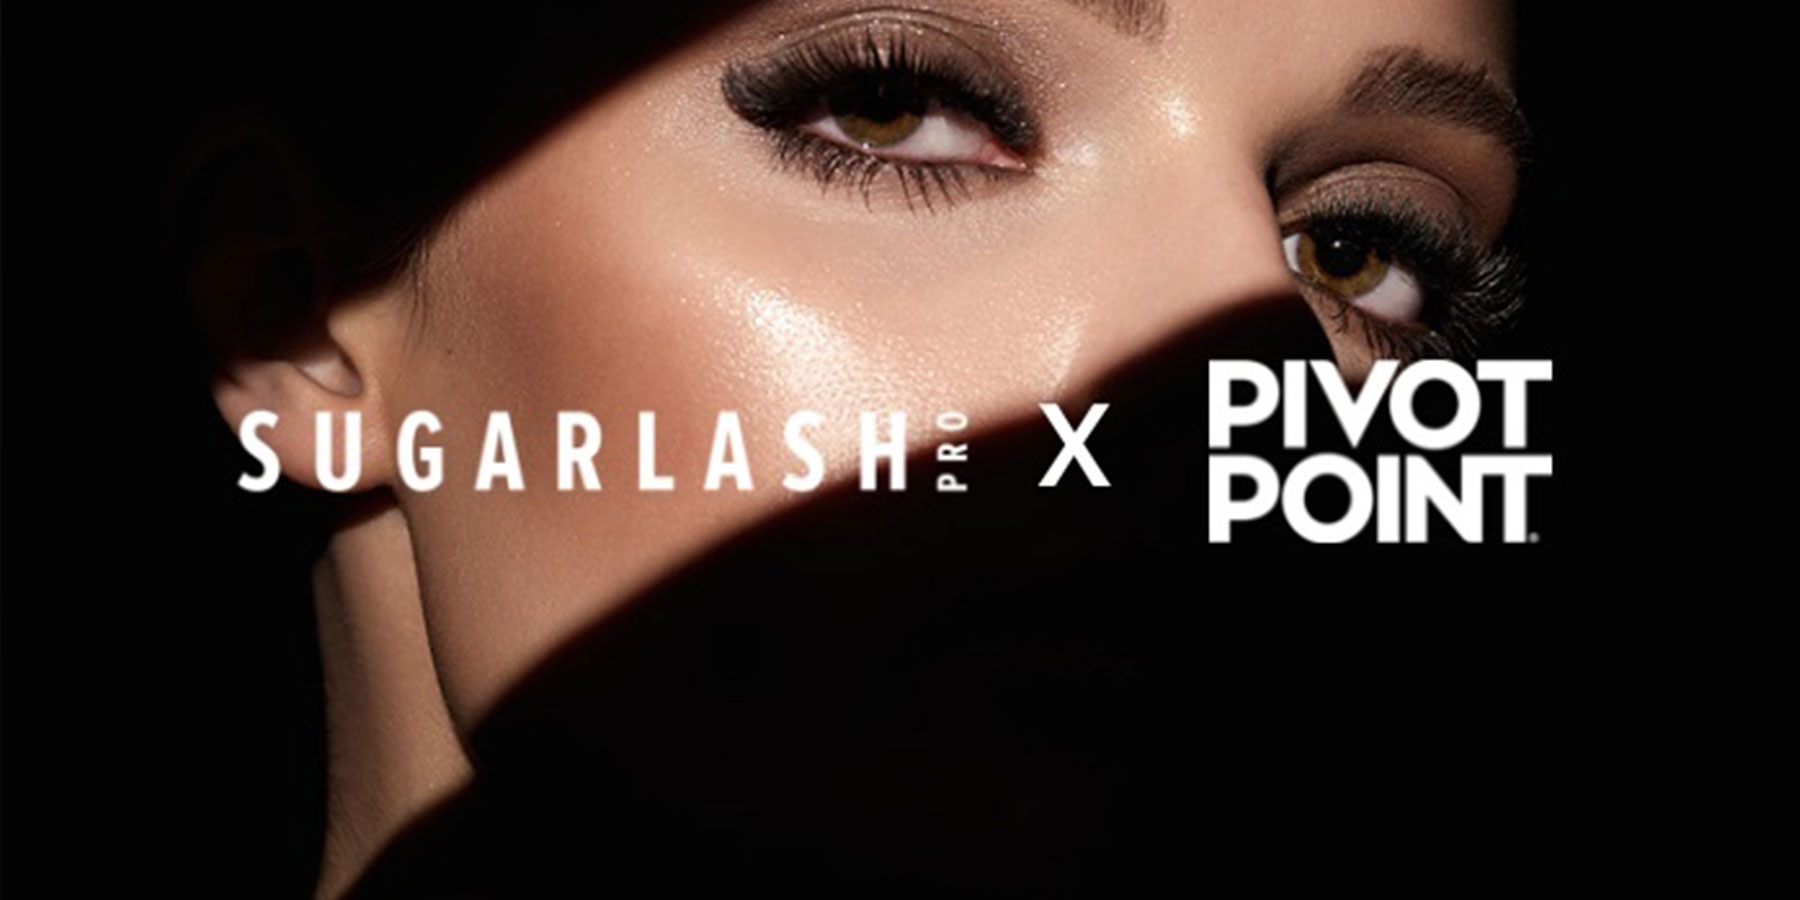 Sugarlash PRO Announces Official Partnership with Pivot Point International